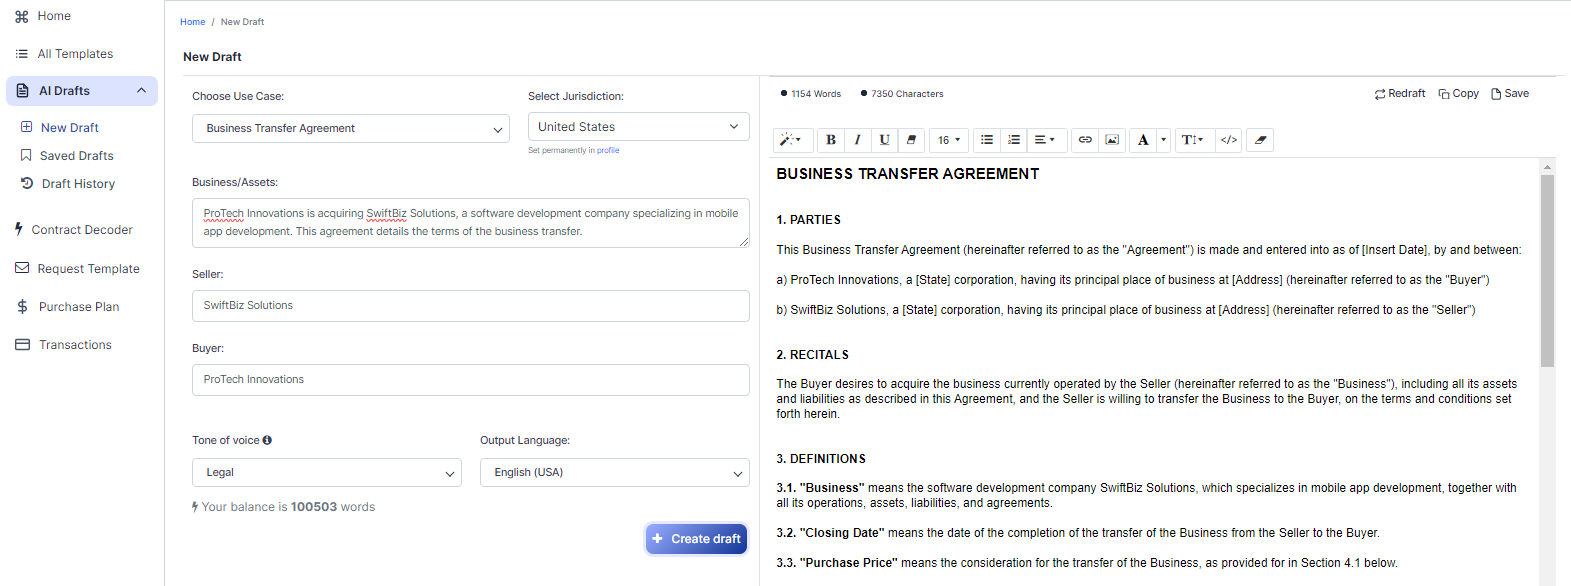 Business Transfer Agreement template